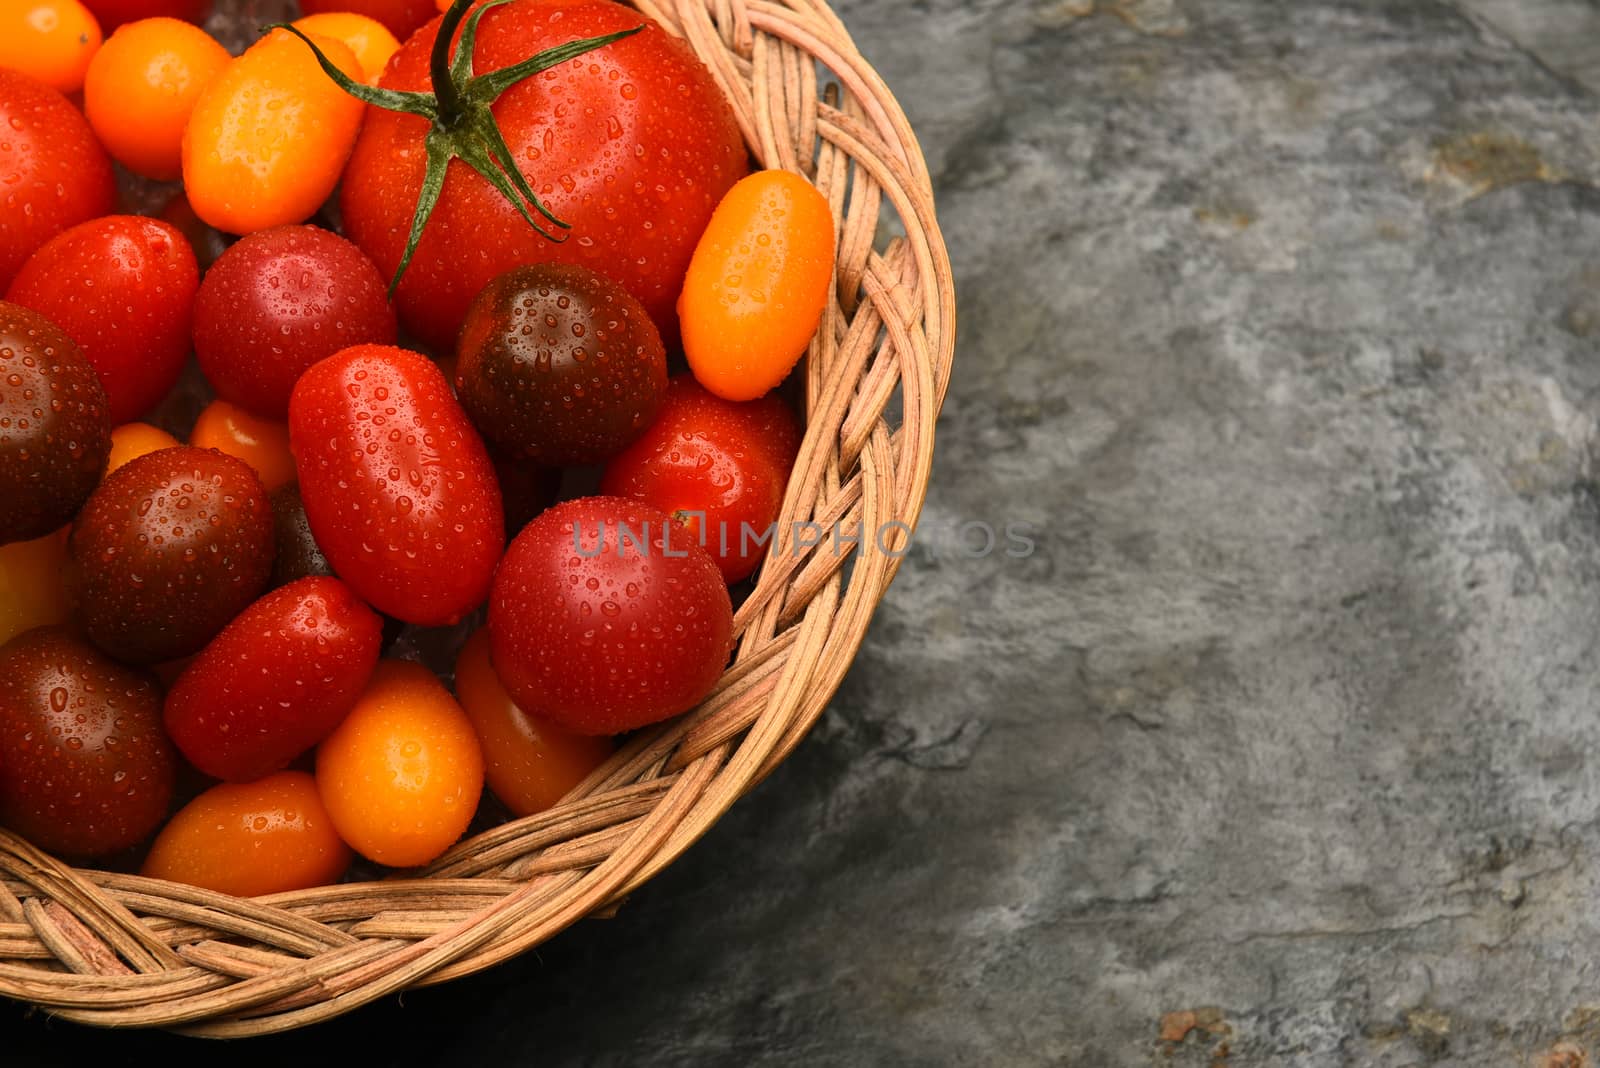 Basket of Medley Tomatoes by sCukrov